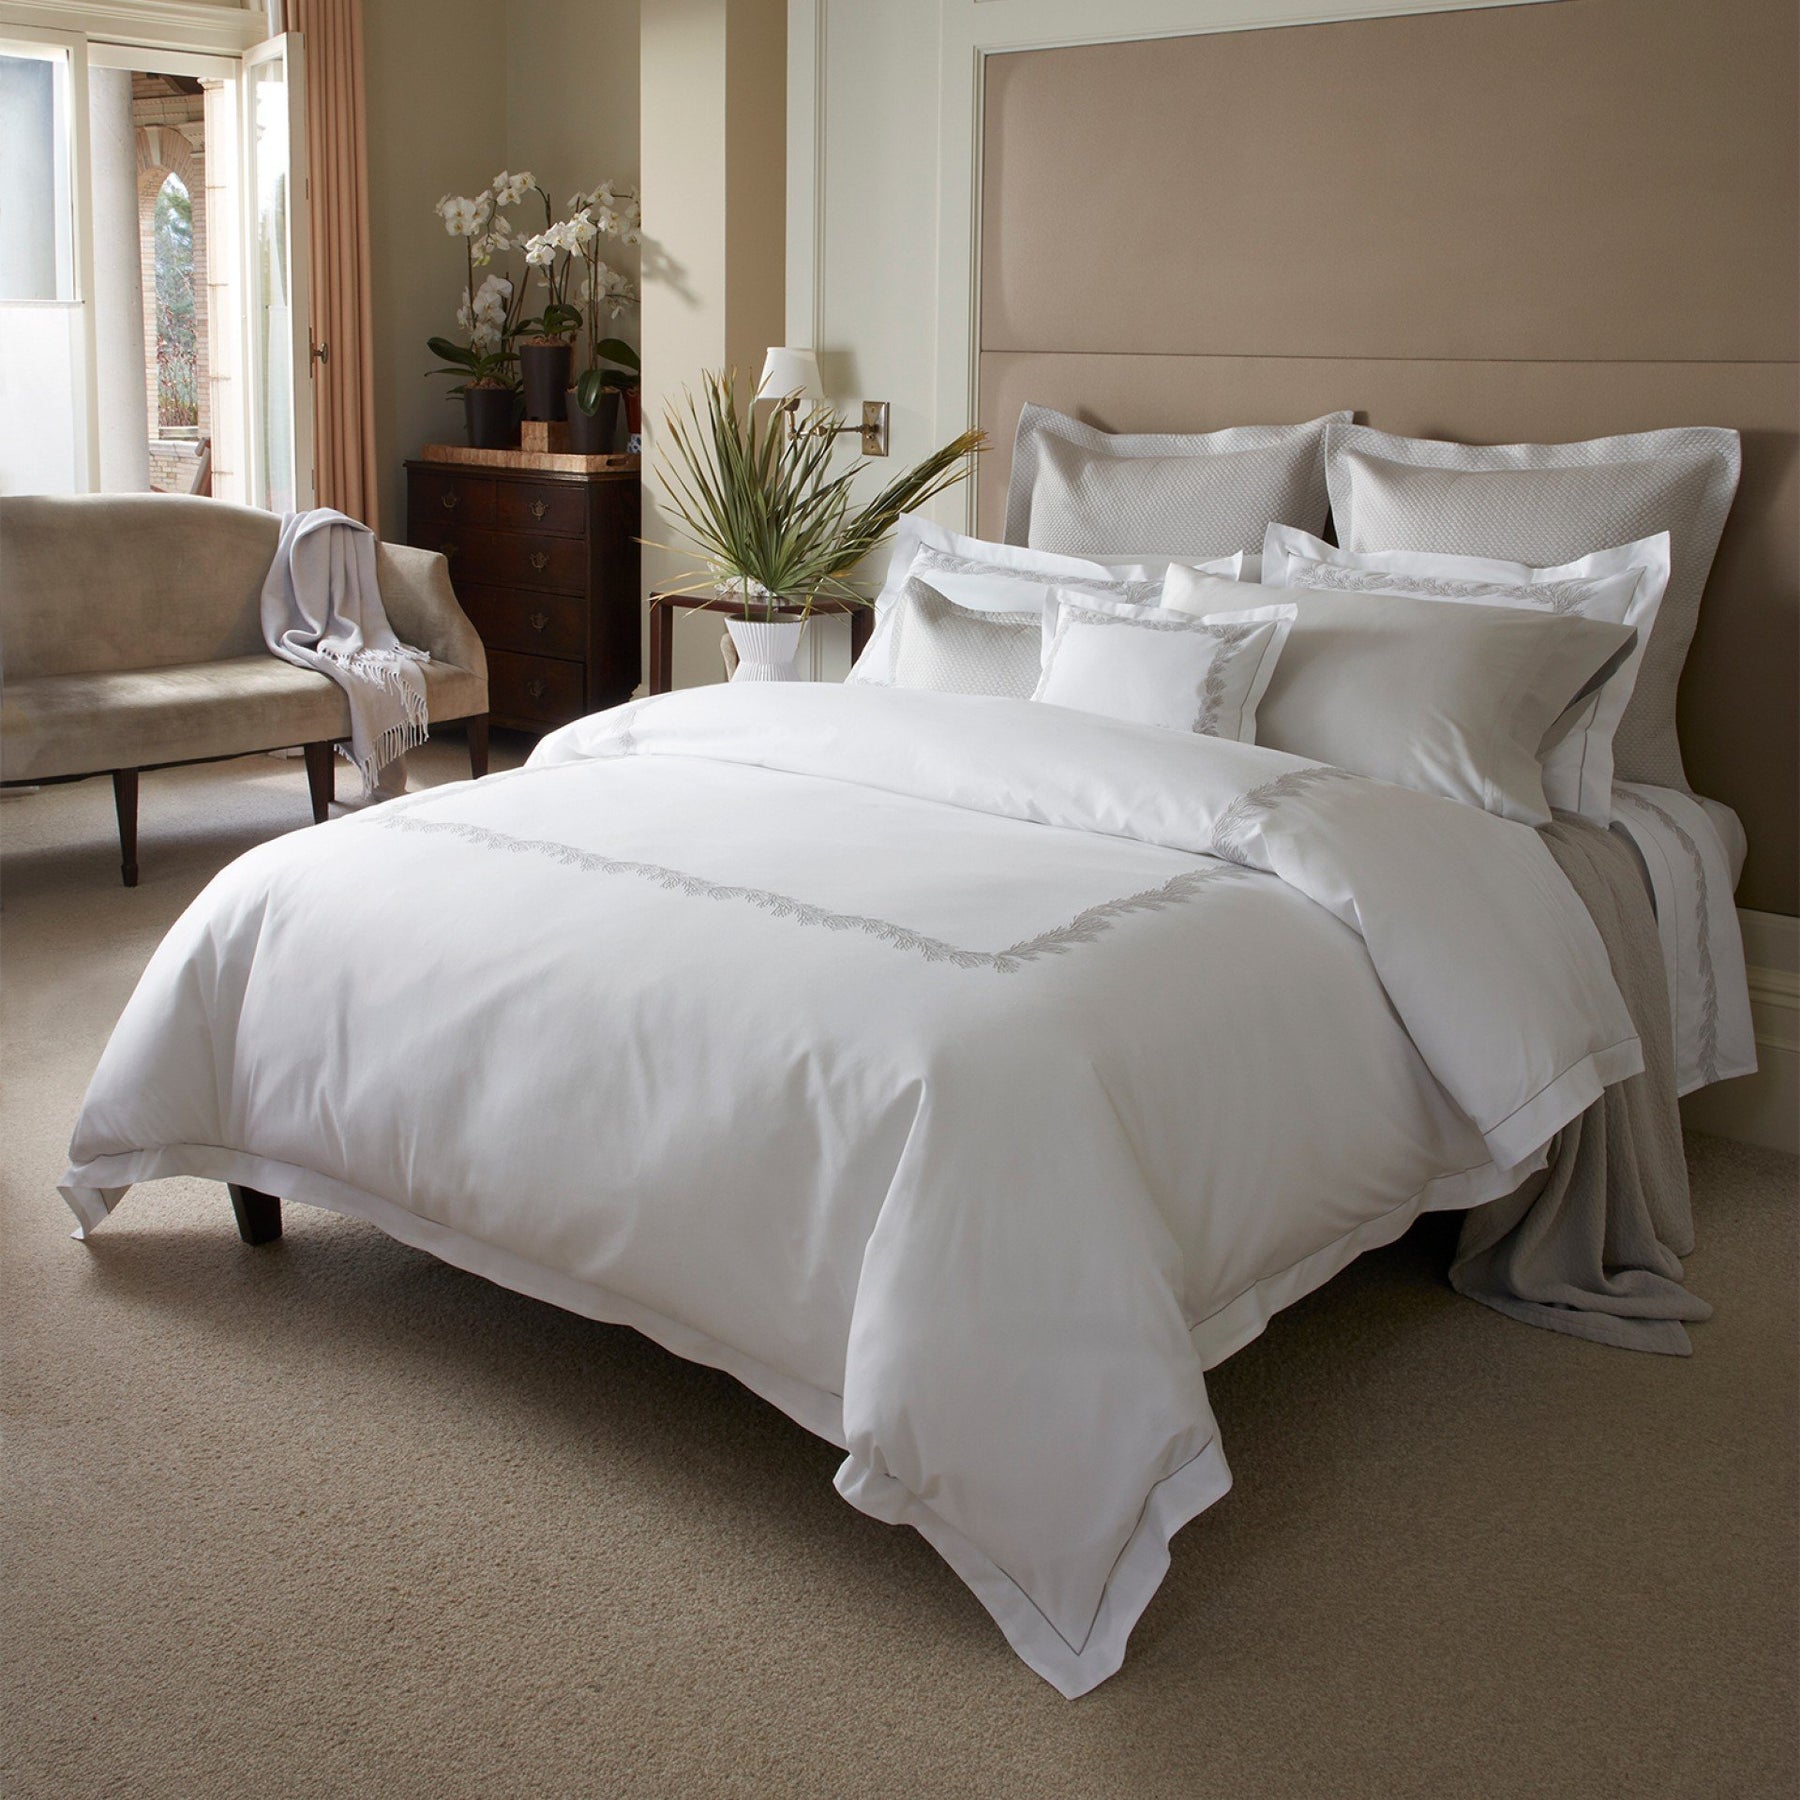 Atoll Bed Linens - Pioneer Linens